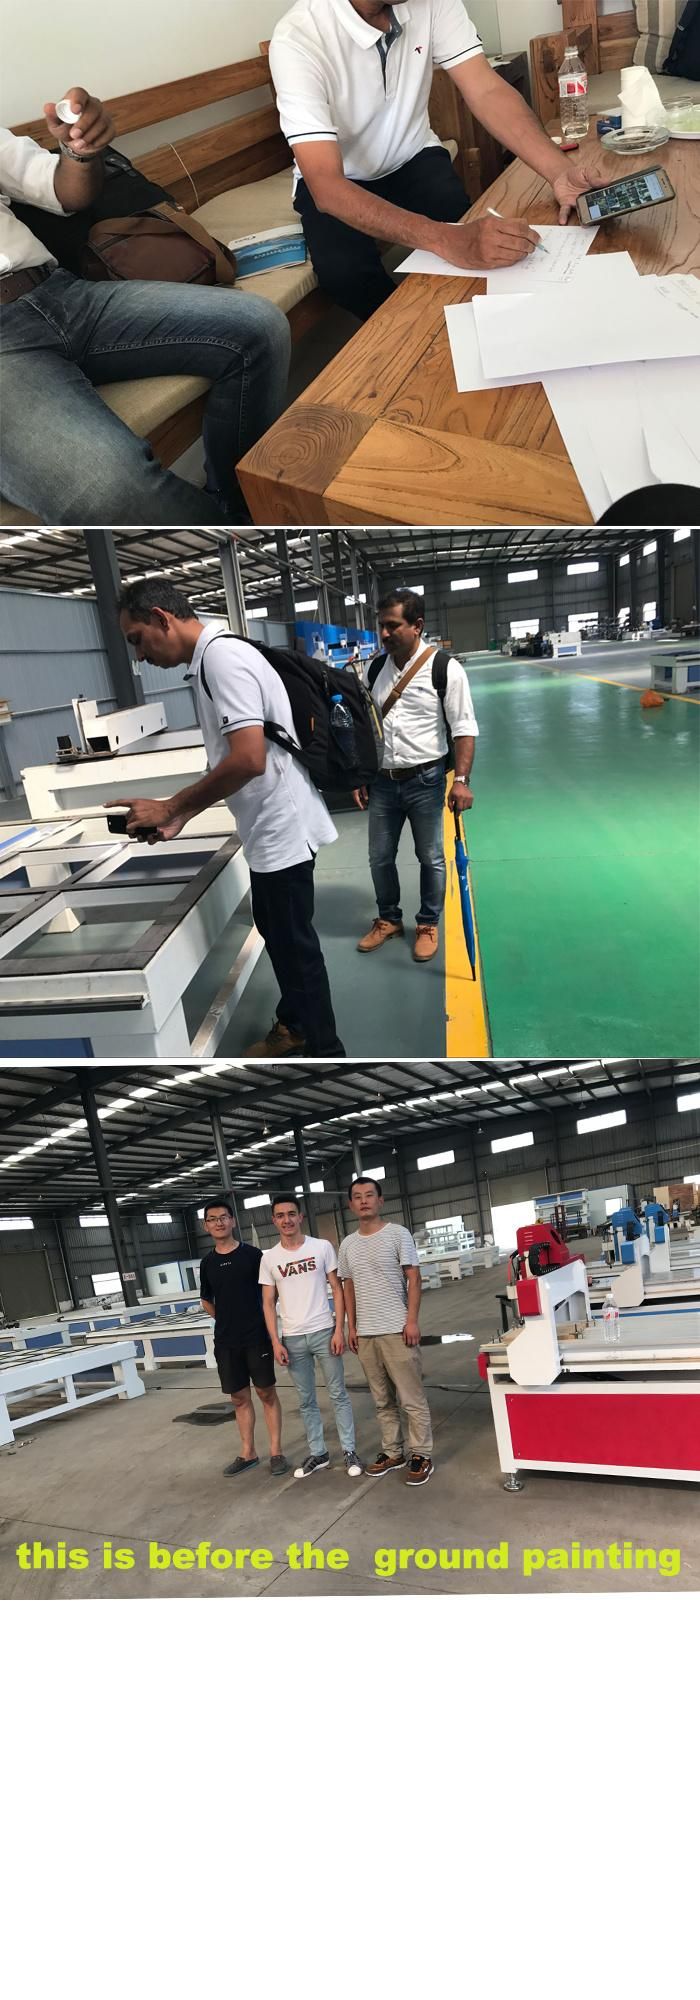 CNC Router Table 1300*2500mm and Atc Liner for 1325/Atc Wood CNC Router